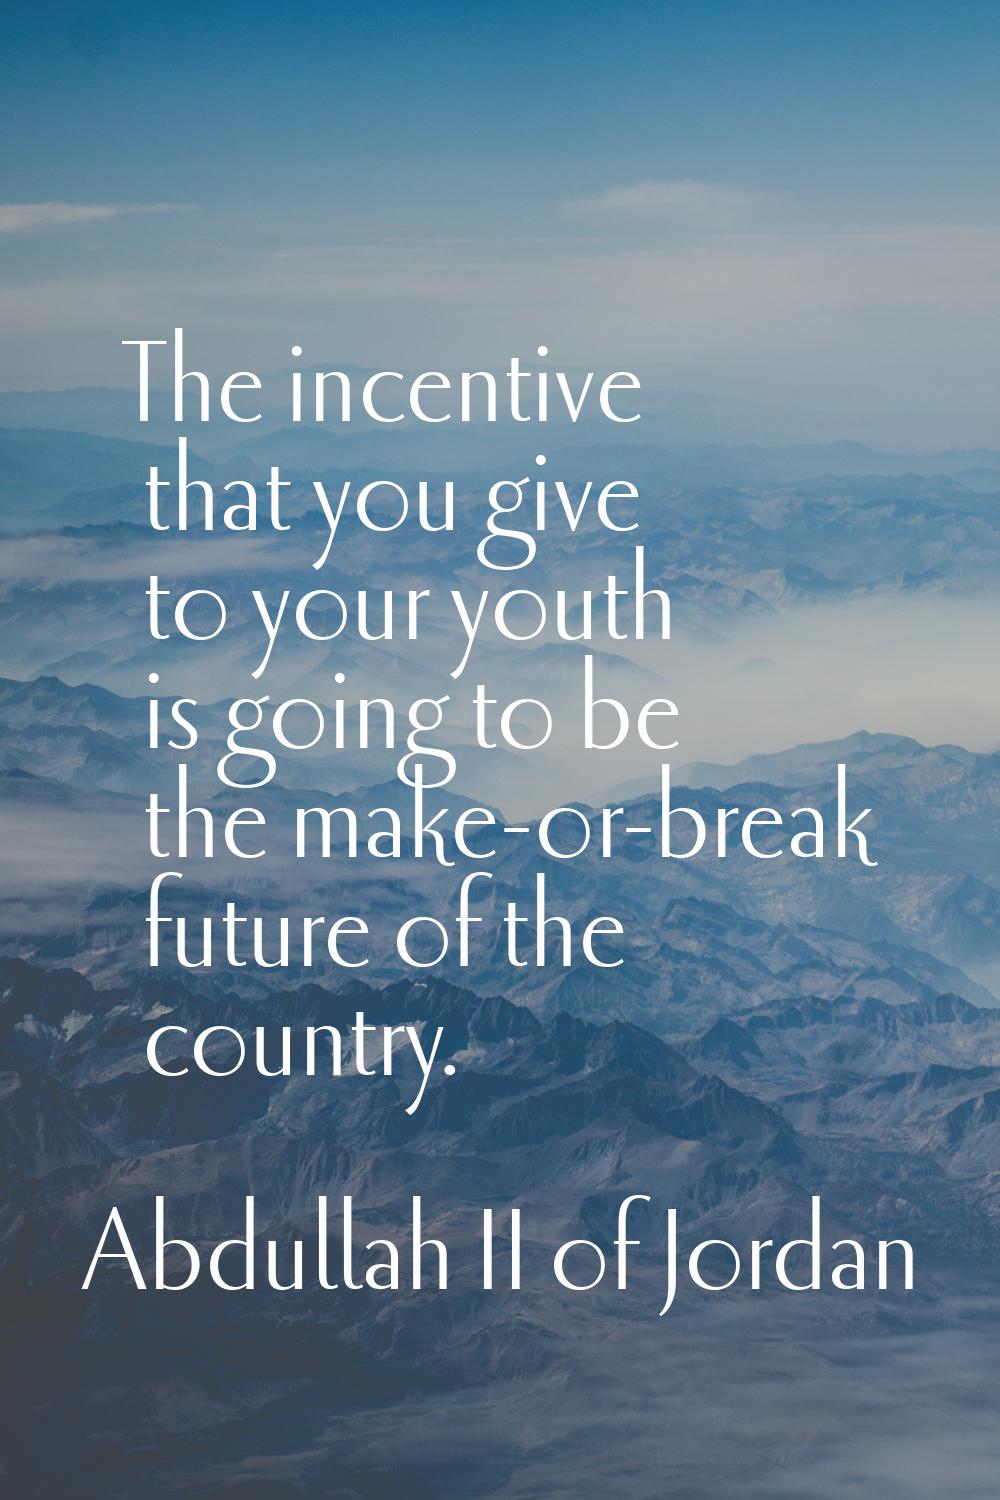 The incentive that you give to your youth is going to be the make-or-break future of the country.